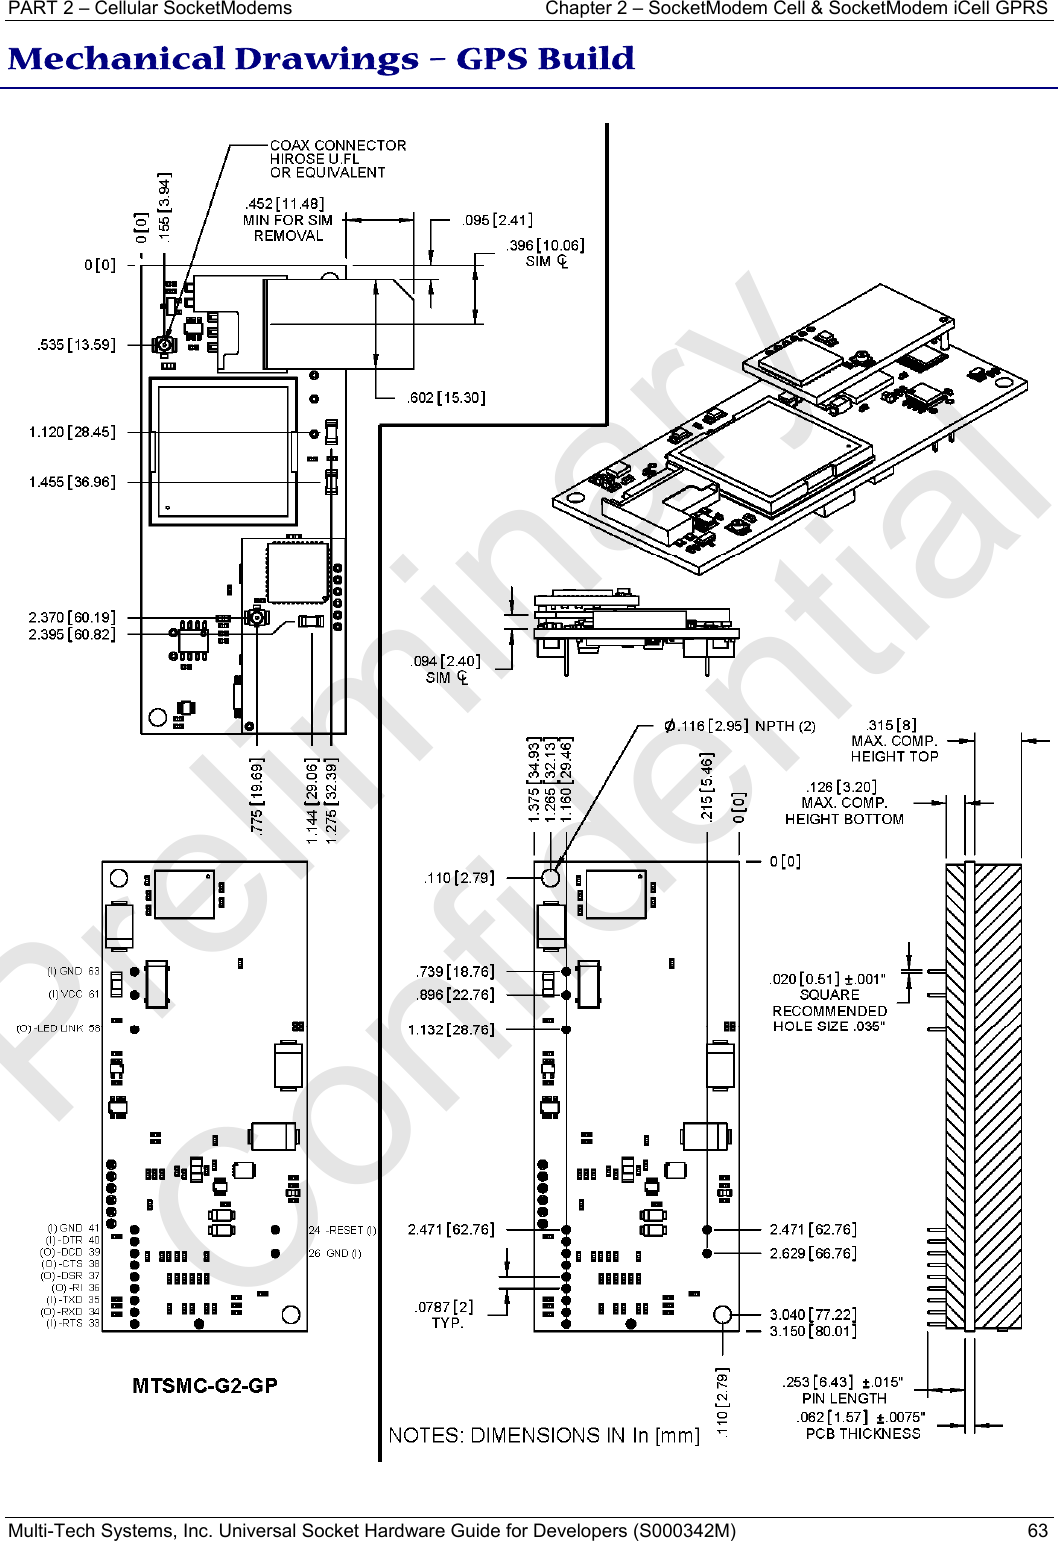 PART 2 – Cellular SocketModems   Chapter 2 – SocketModem Cell &amp; SocketModem iCell GPRS Multi-Tech Systems, Inc. Universal Socket Hardware Guide for Developers (S000342M)  63  Mechanical Drawings – GPS Build  Preliminary  Confidential